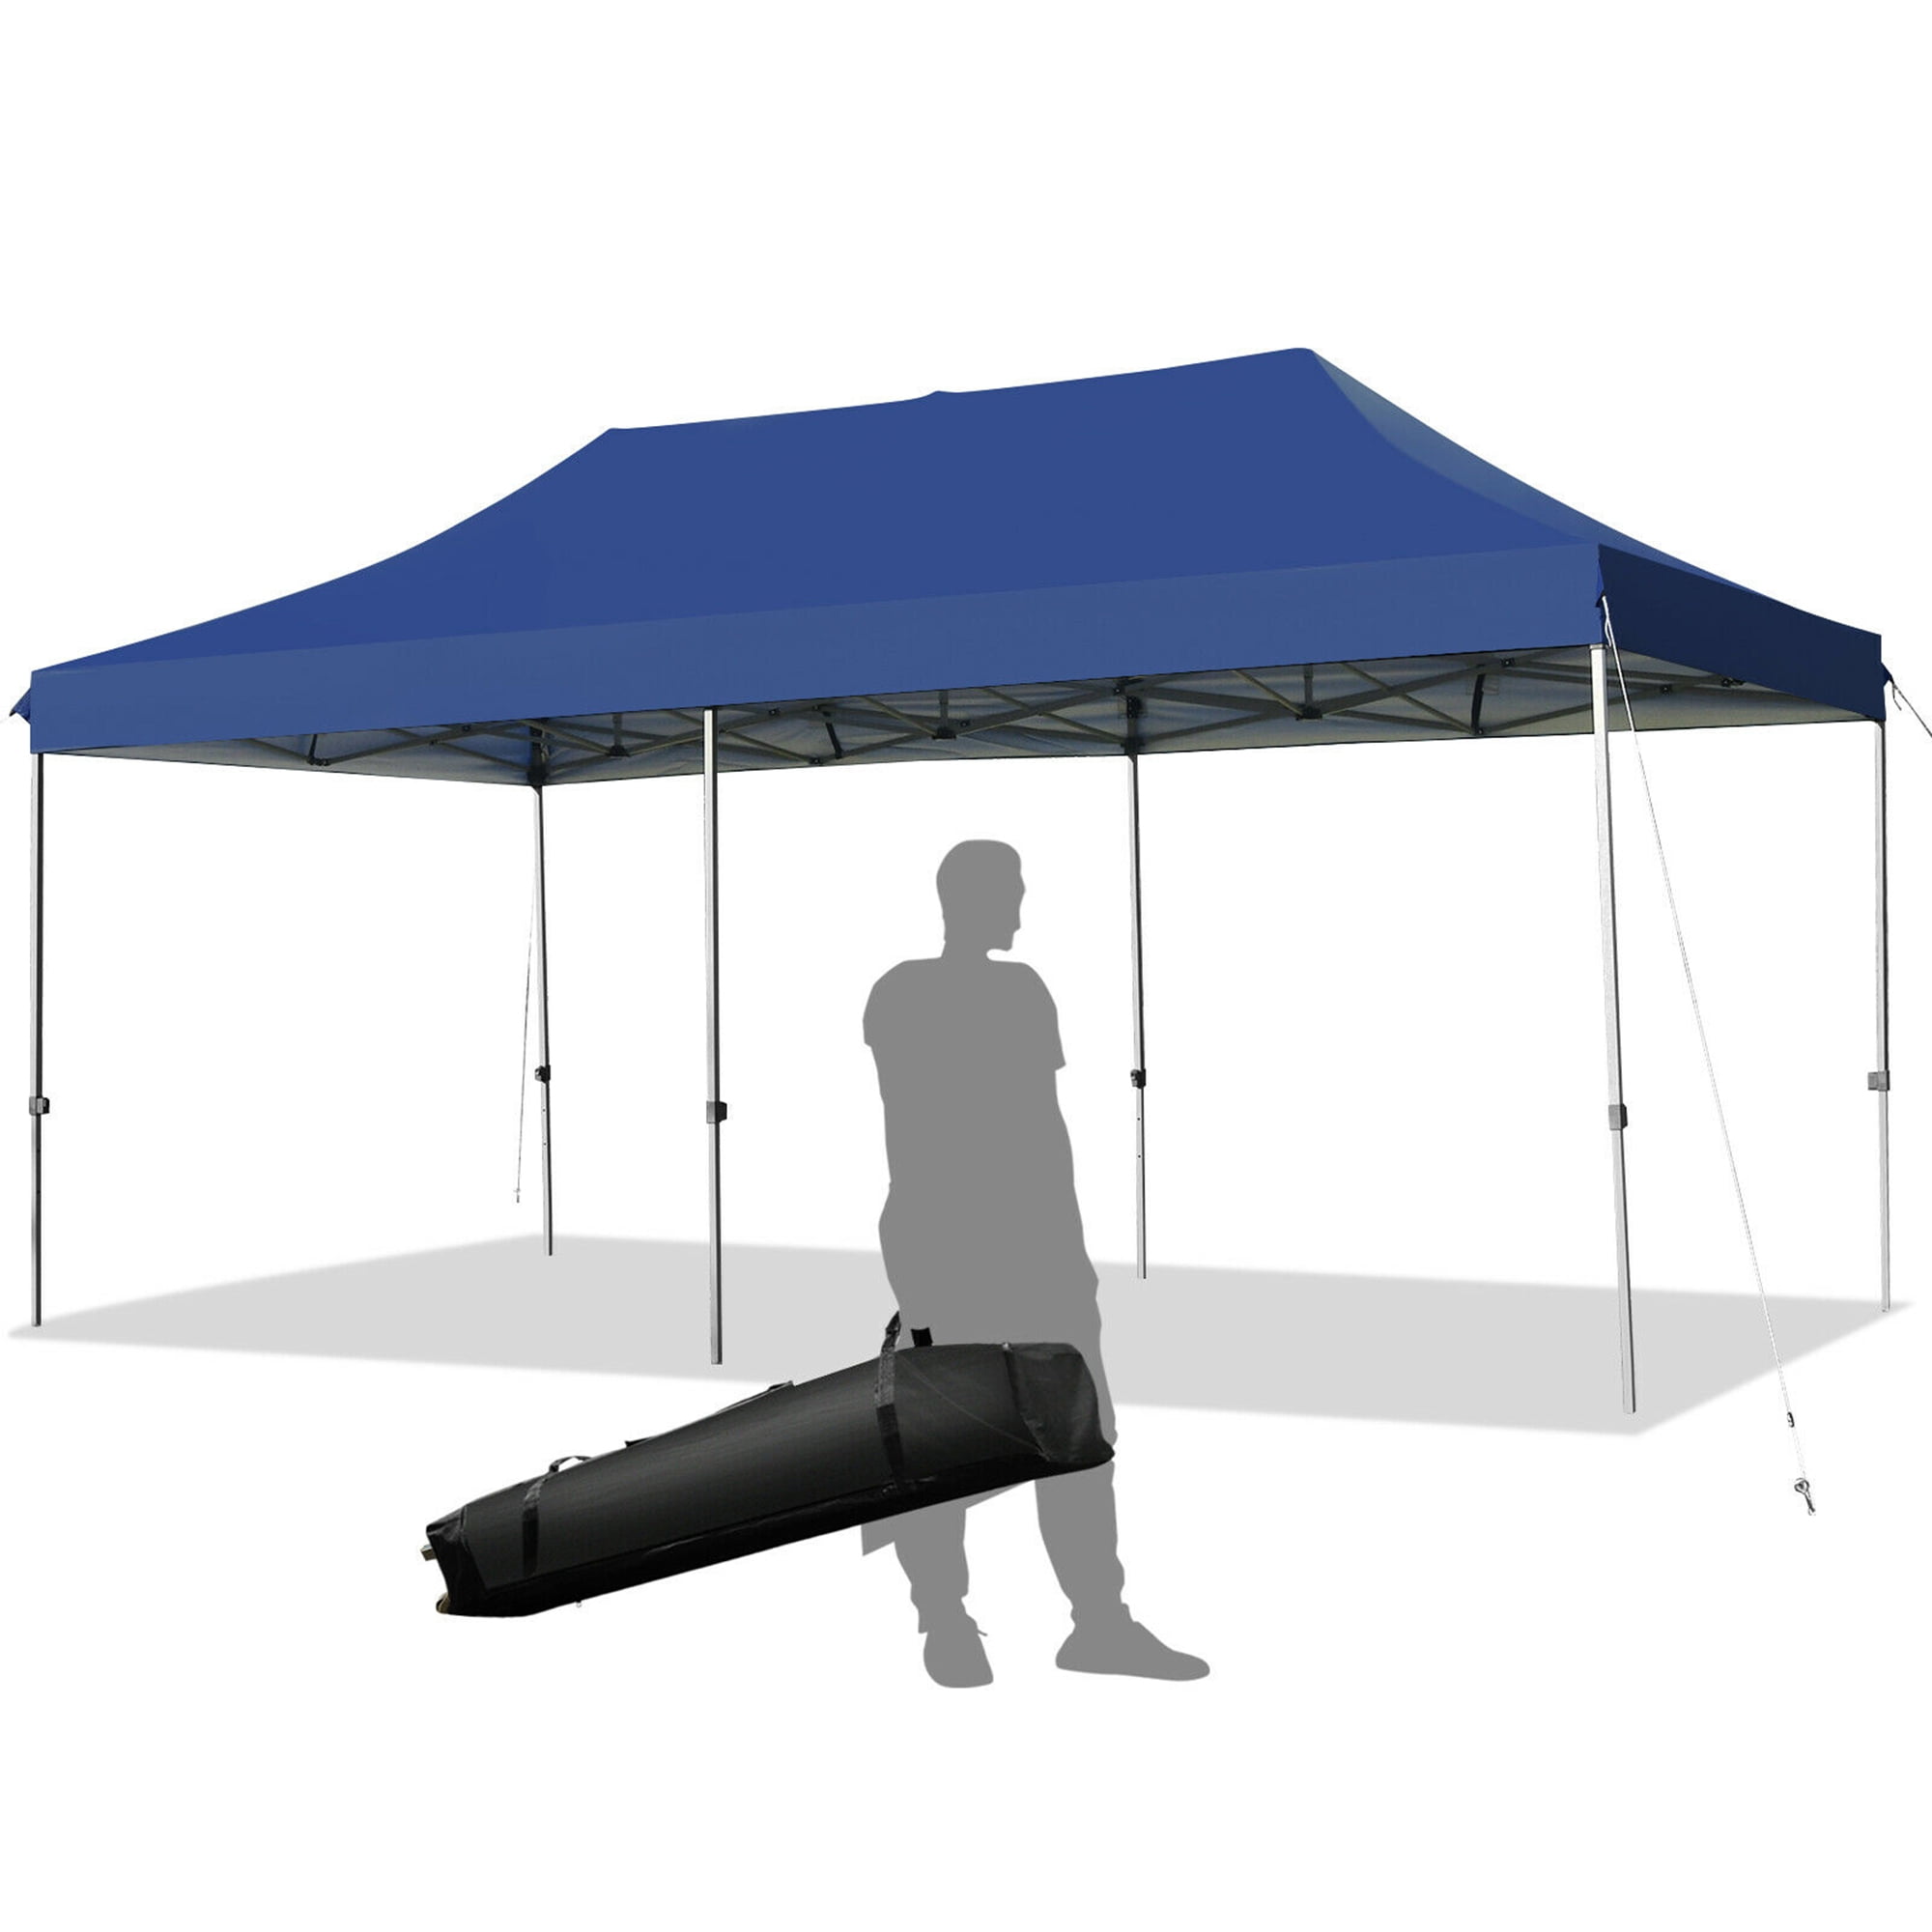 8 Colors Quictent Silvox 10x10 EZ Pop Up Canopy Party Tent Instant Gazebo Waterproof with 4 Sides & Roller Bag